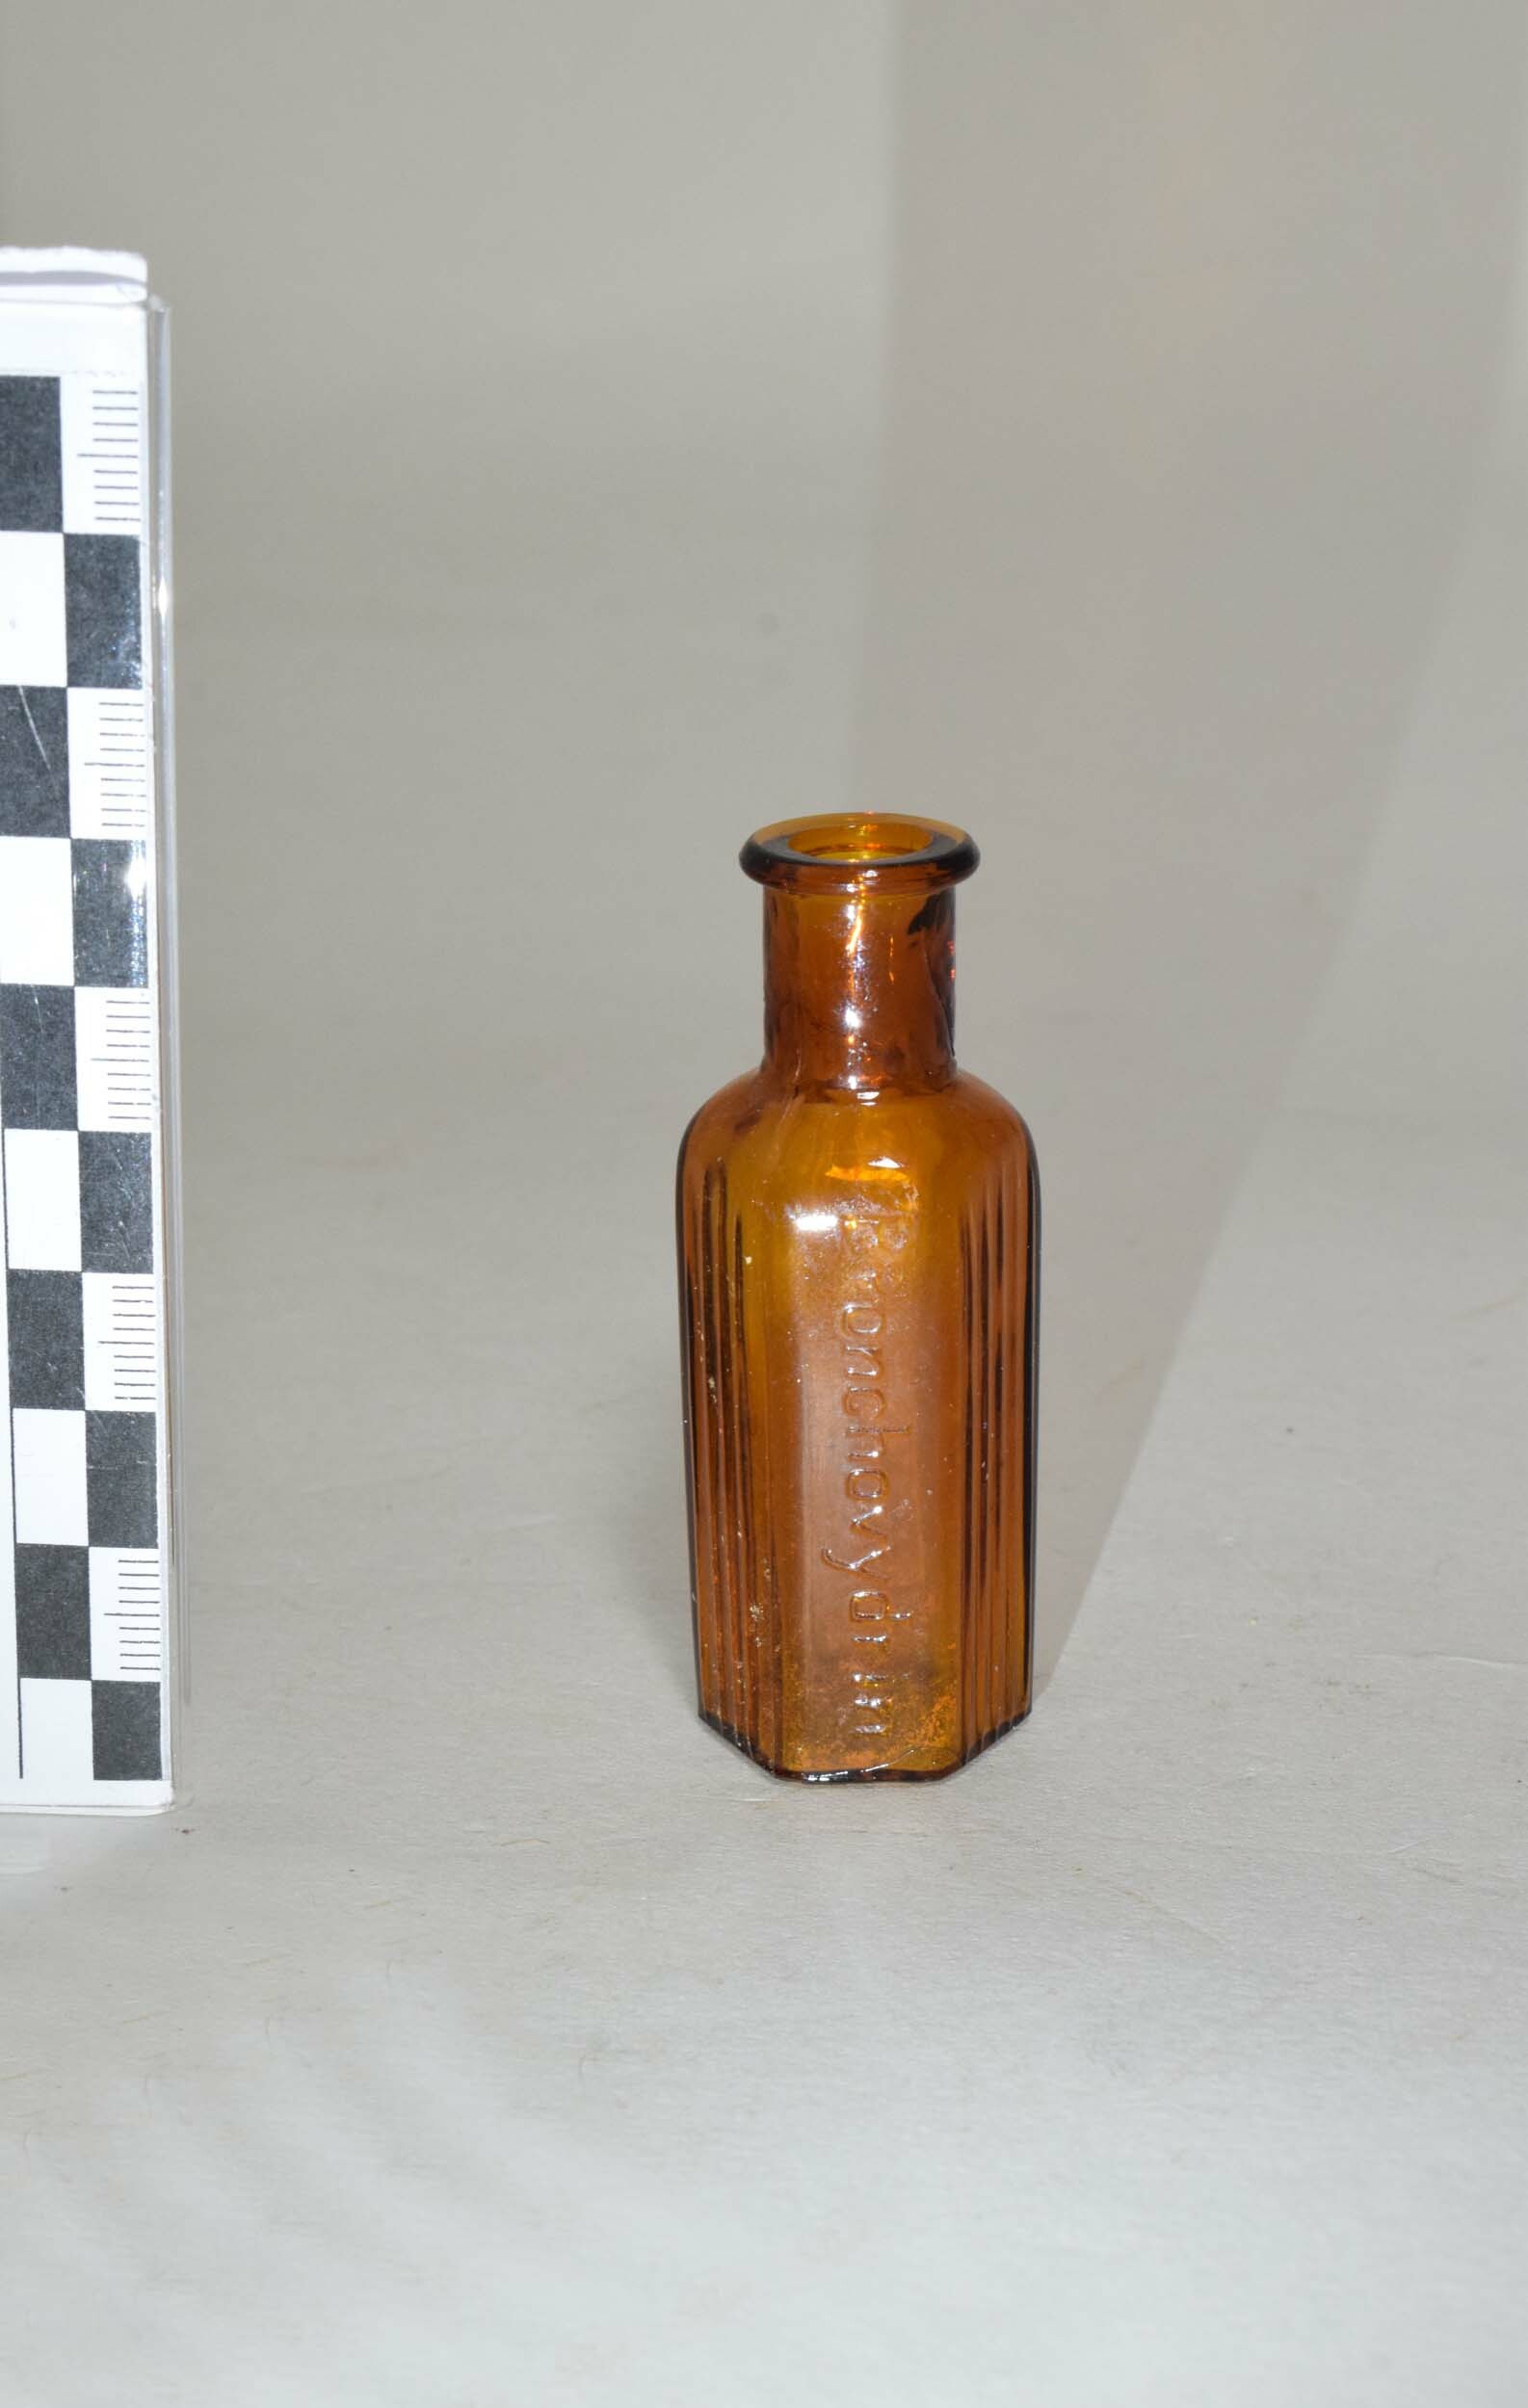 Apothekenflasche "Bronchovydrin" (Heimatmuseum Dohna CC BY-NC-SA)